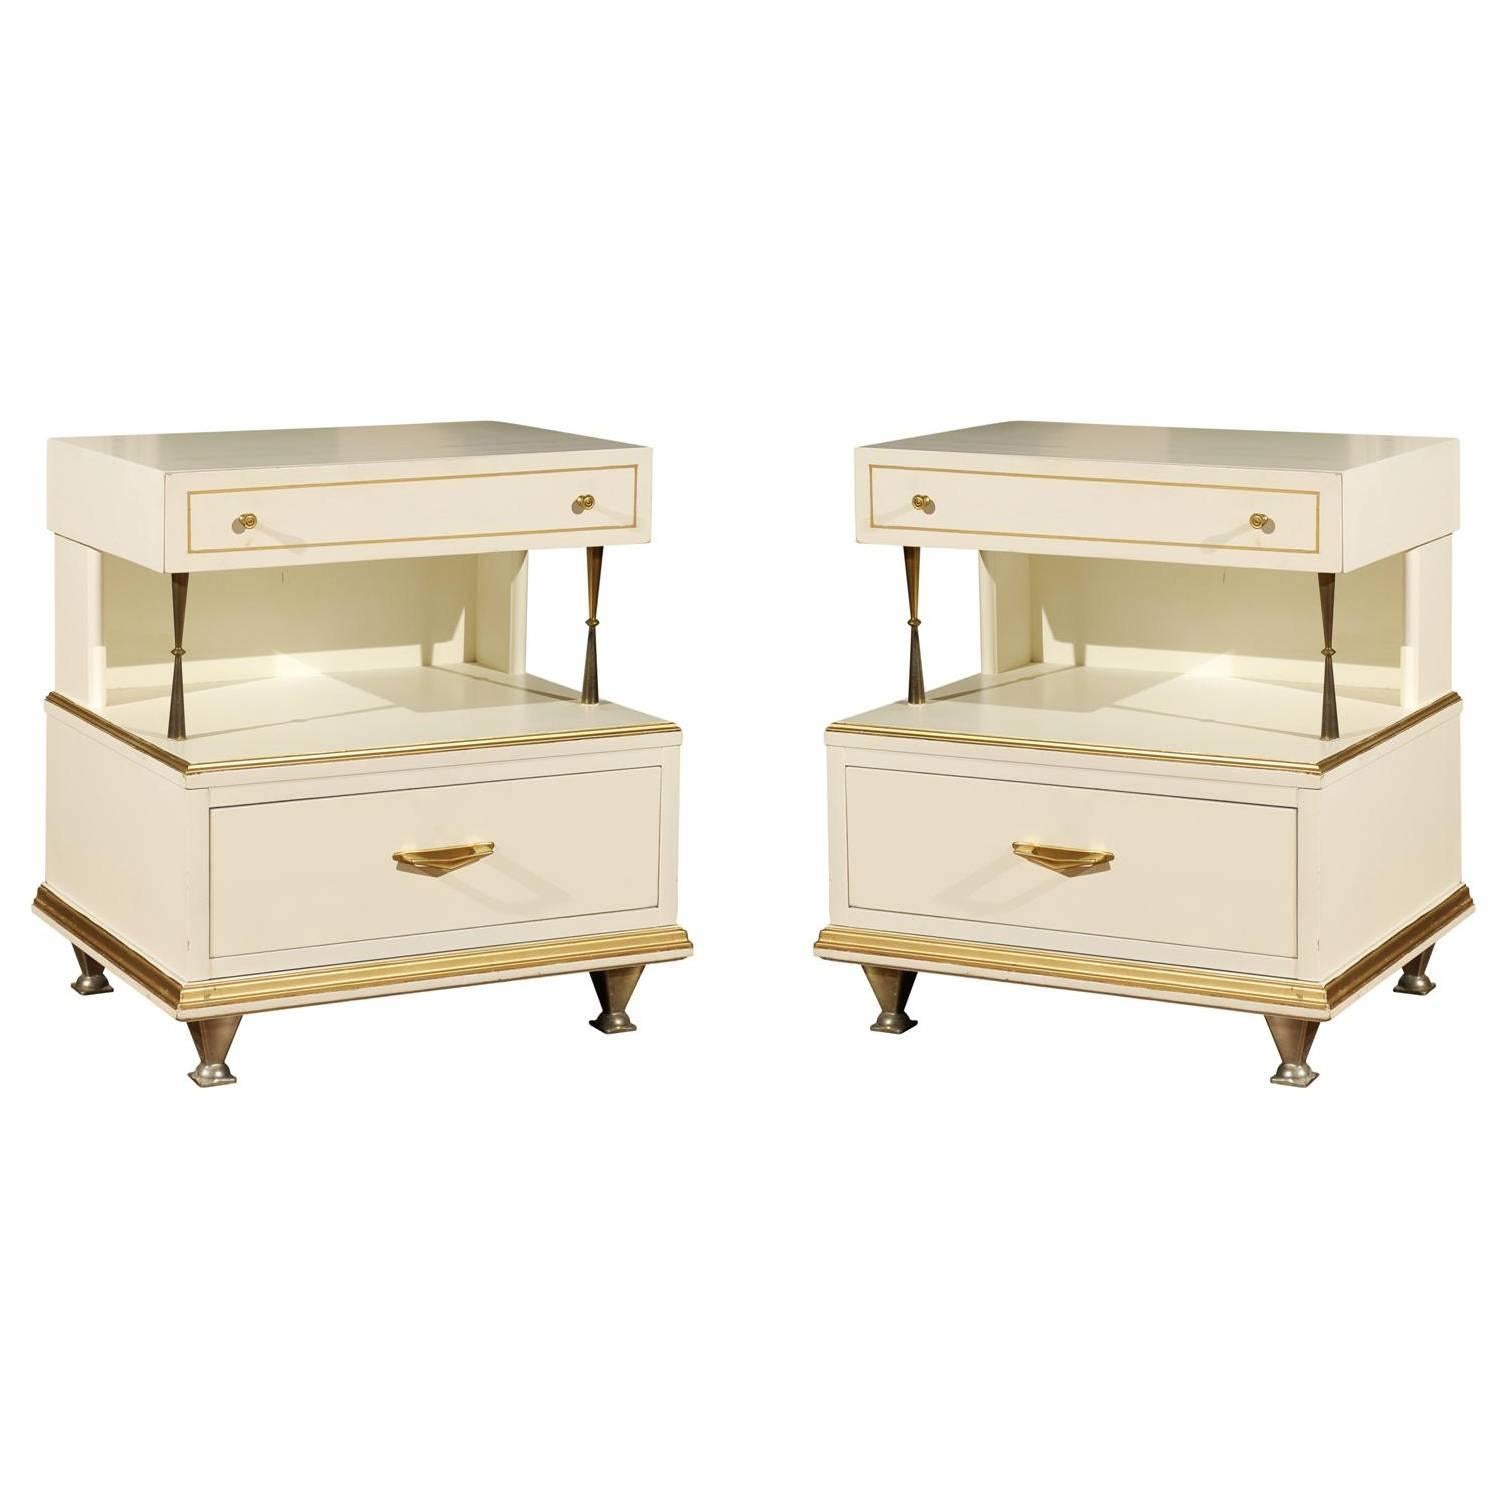 Rare Pair of Modern End Tables or Nightstands by American of Martinsville